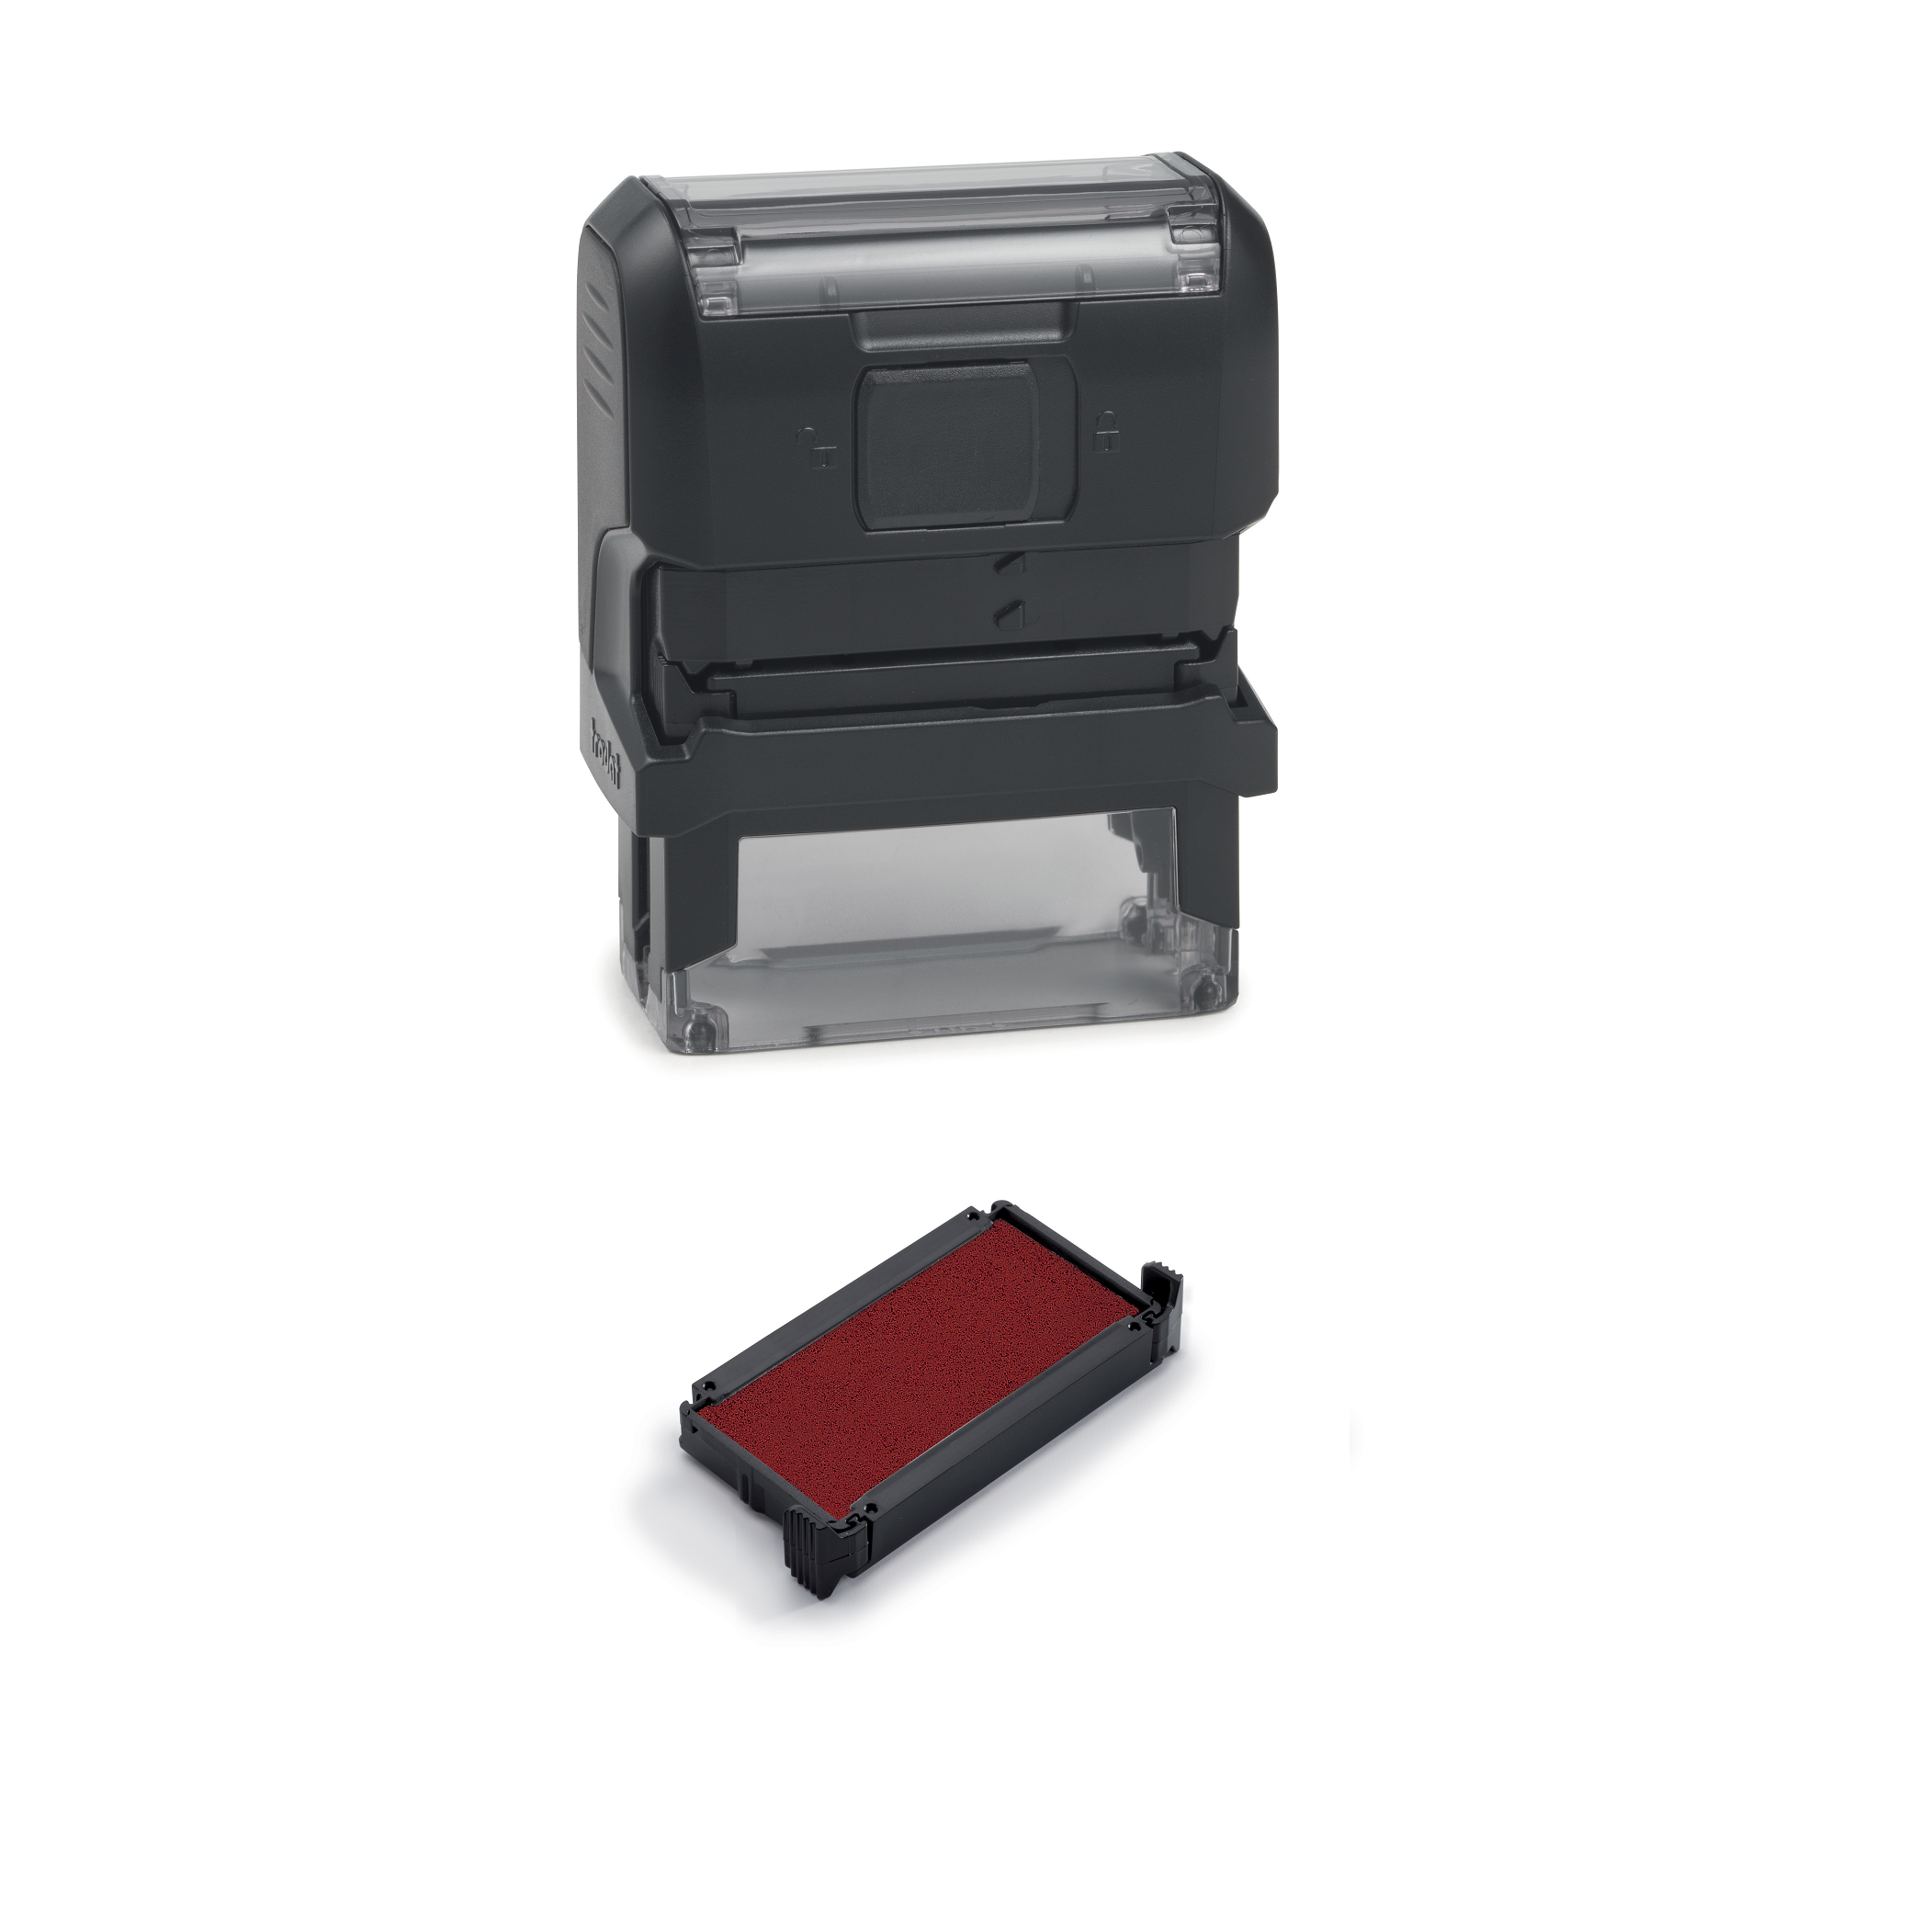 Discard Office Self Inking Rubber Stamp